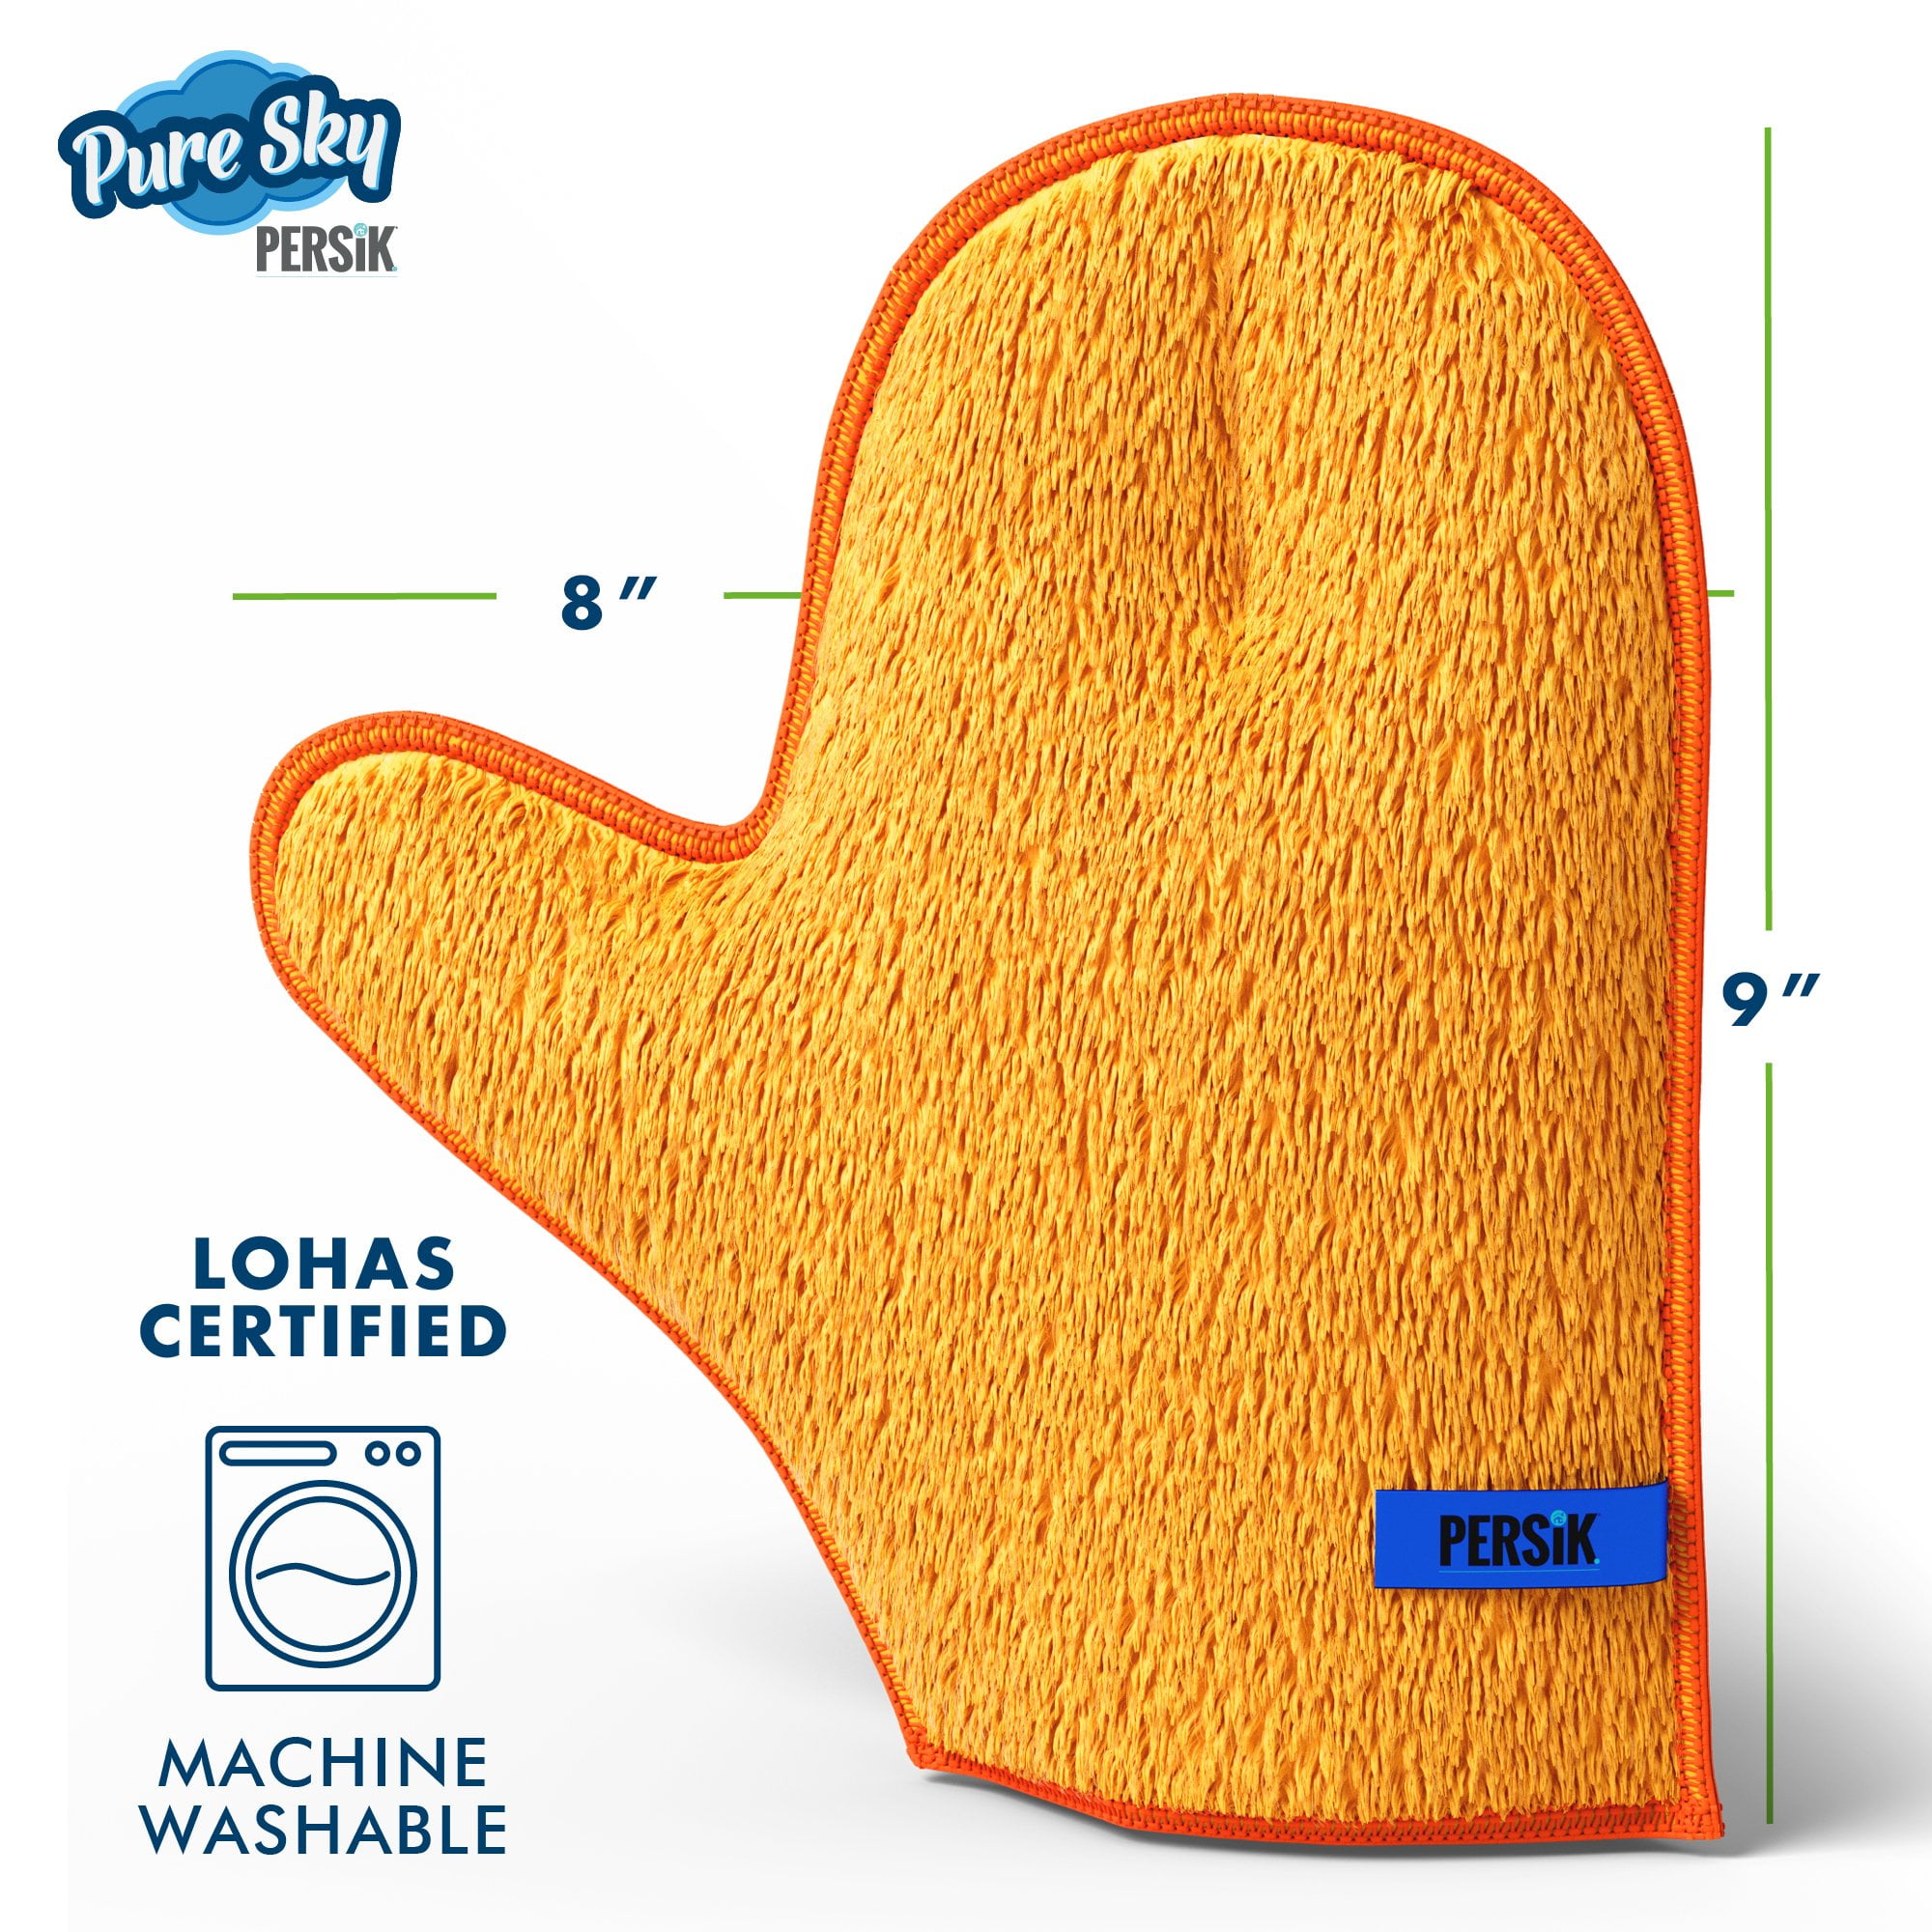 Cleaning Cleaning Kitchen Ultra-Microfiber Pure-Sky Free - JUST Needed + Sponge ADD Water Glass Dusting Window Cleaning Detergents No Streak and Glove/MITT and + Cleaning Cloth - Includes Towel